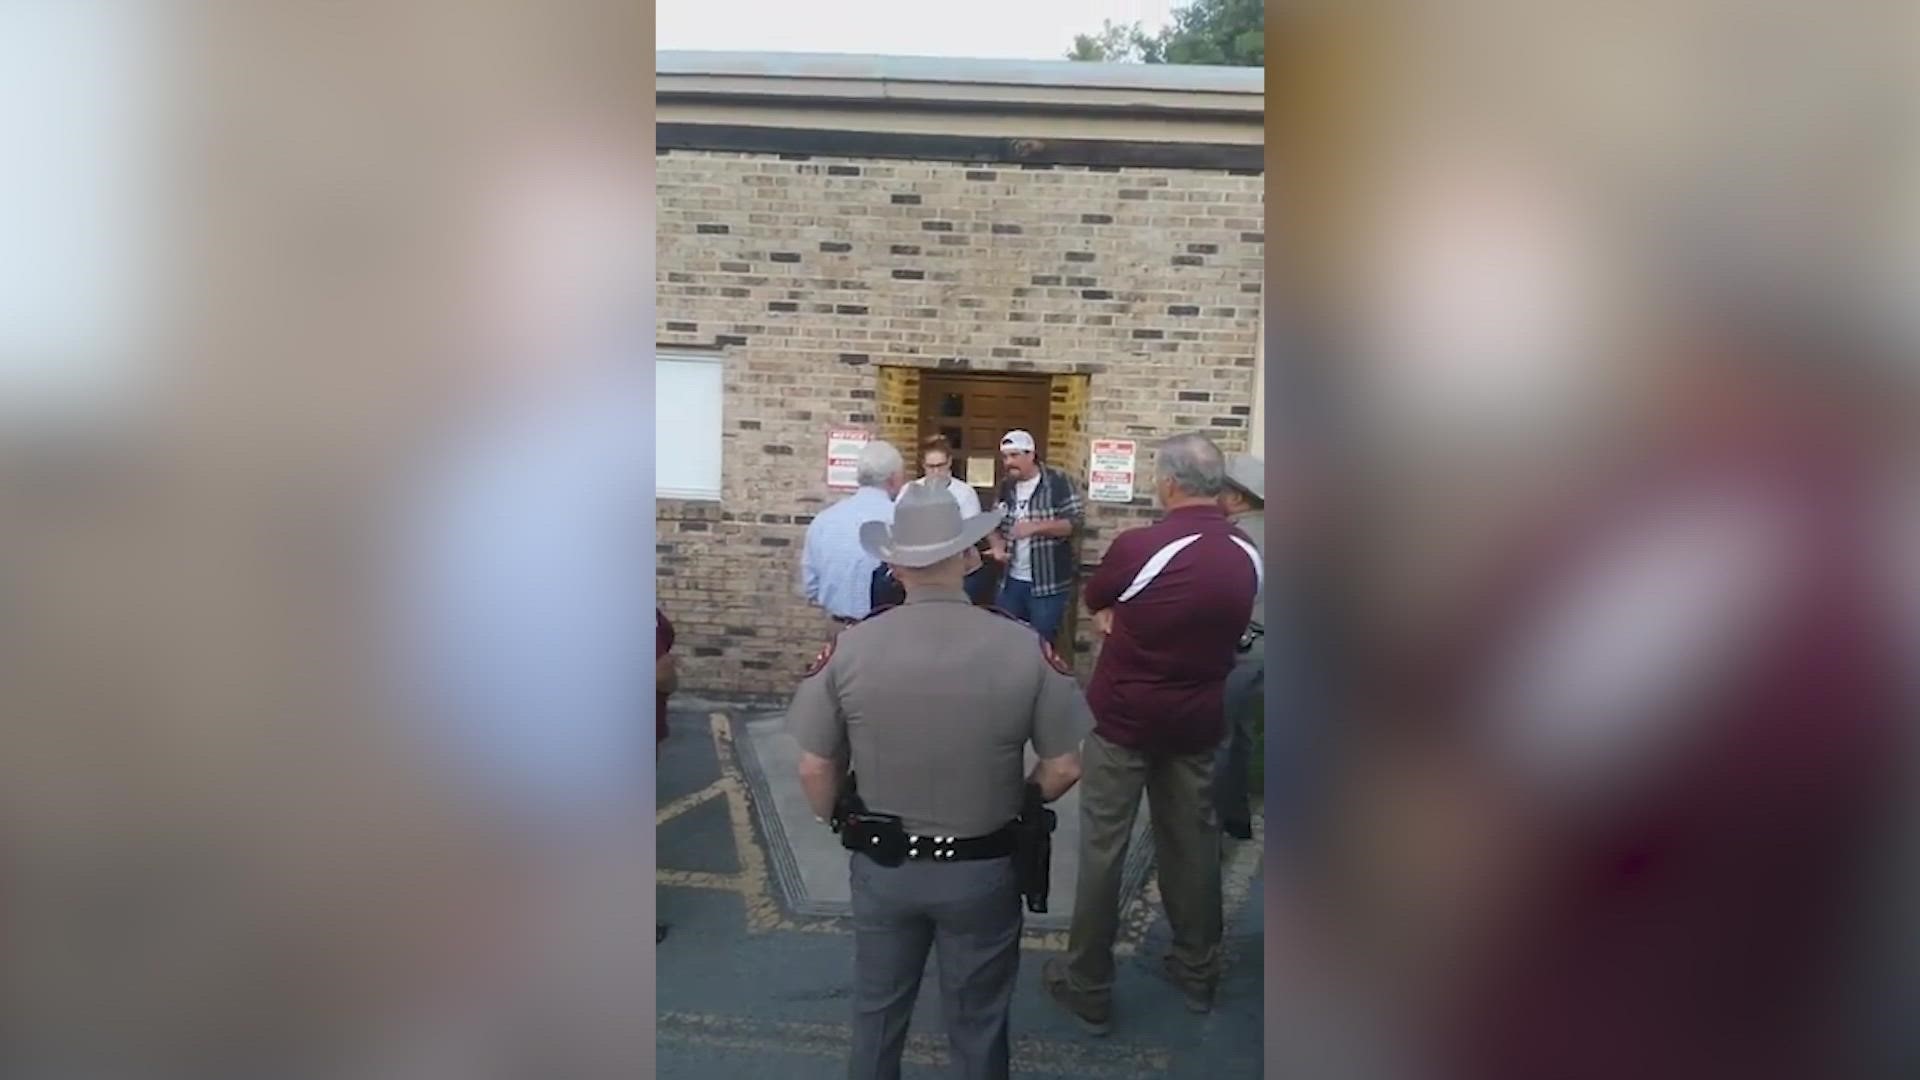 Bret Cross, whose son was killed in the Uvalde shooting, pleads with district officials to take action against officers. Video courtesy: Hope Sanchez